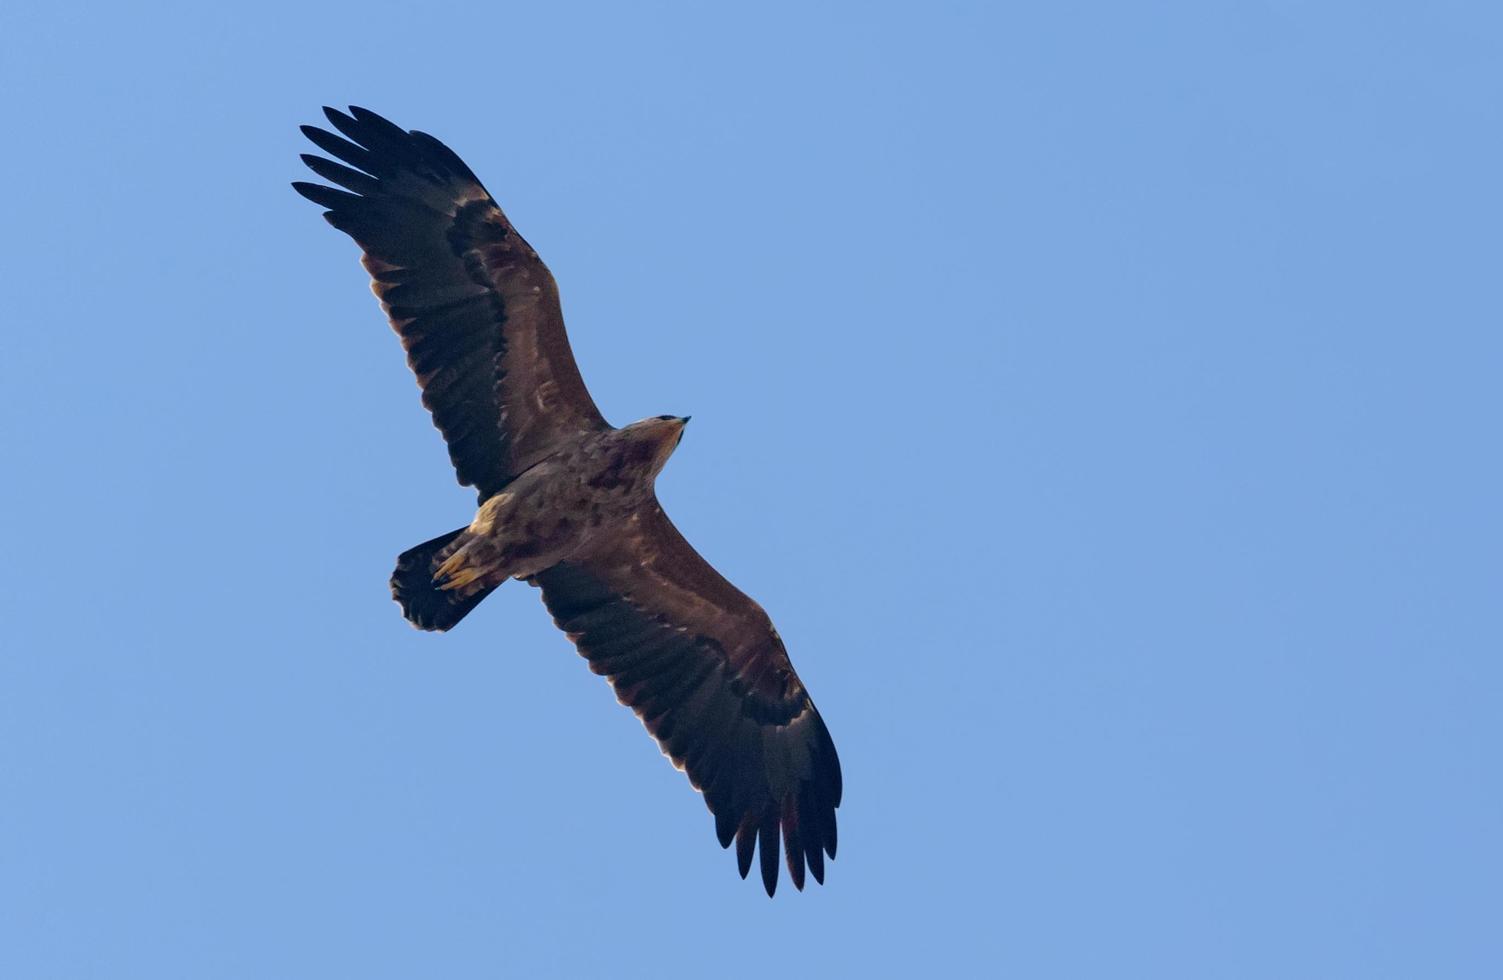 Adult Lesser spotted eagle - Clanga pomarina - soars in blue sky during spring migration season photo